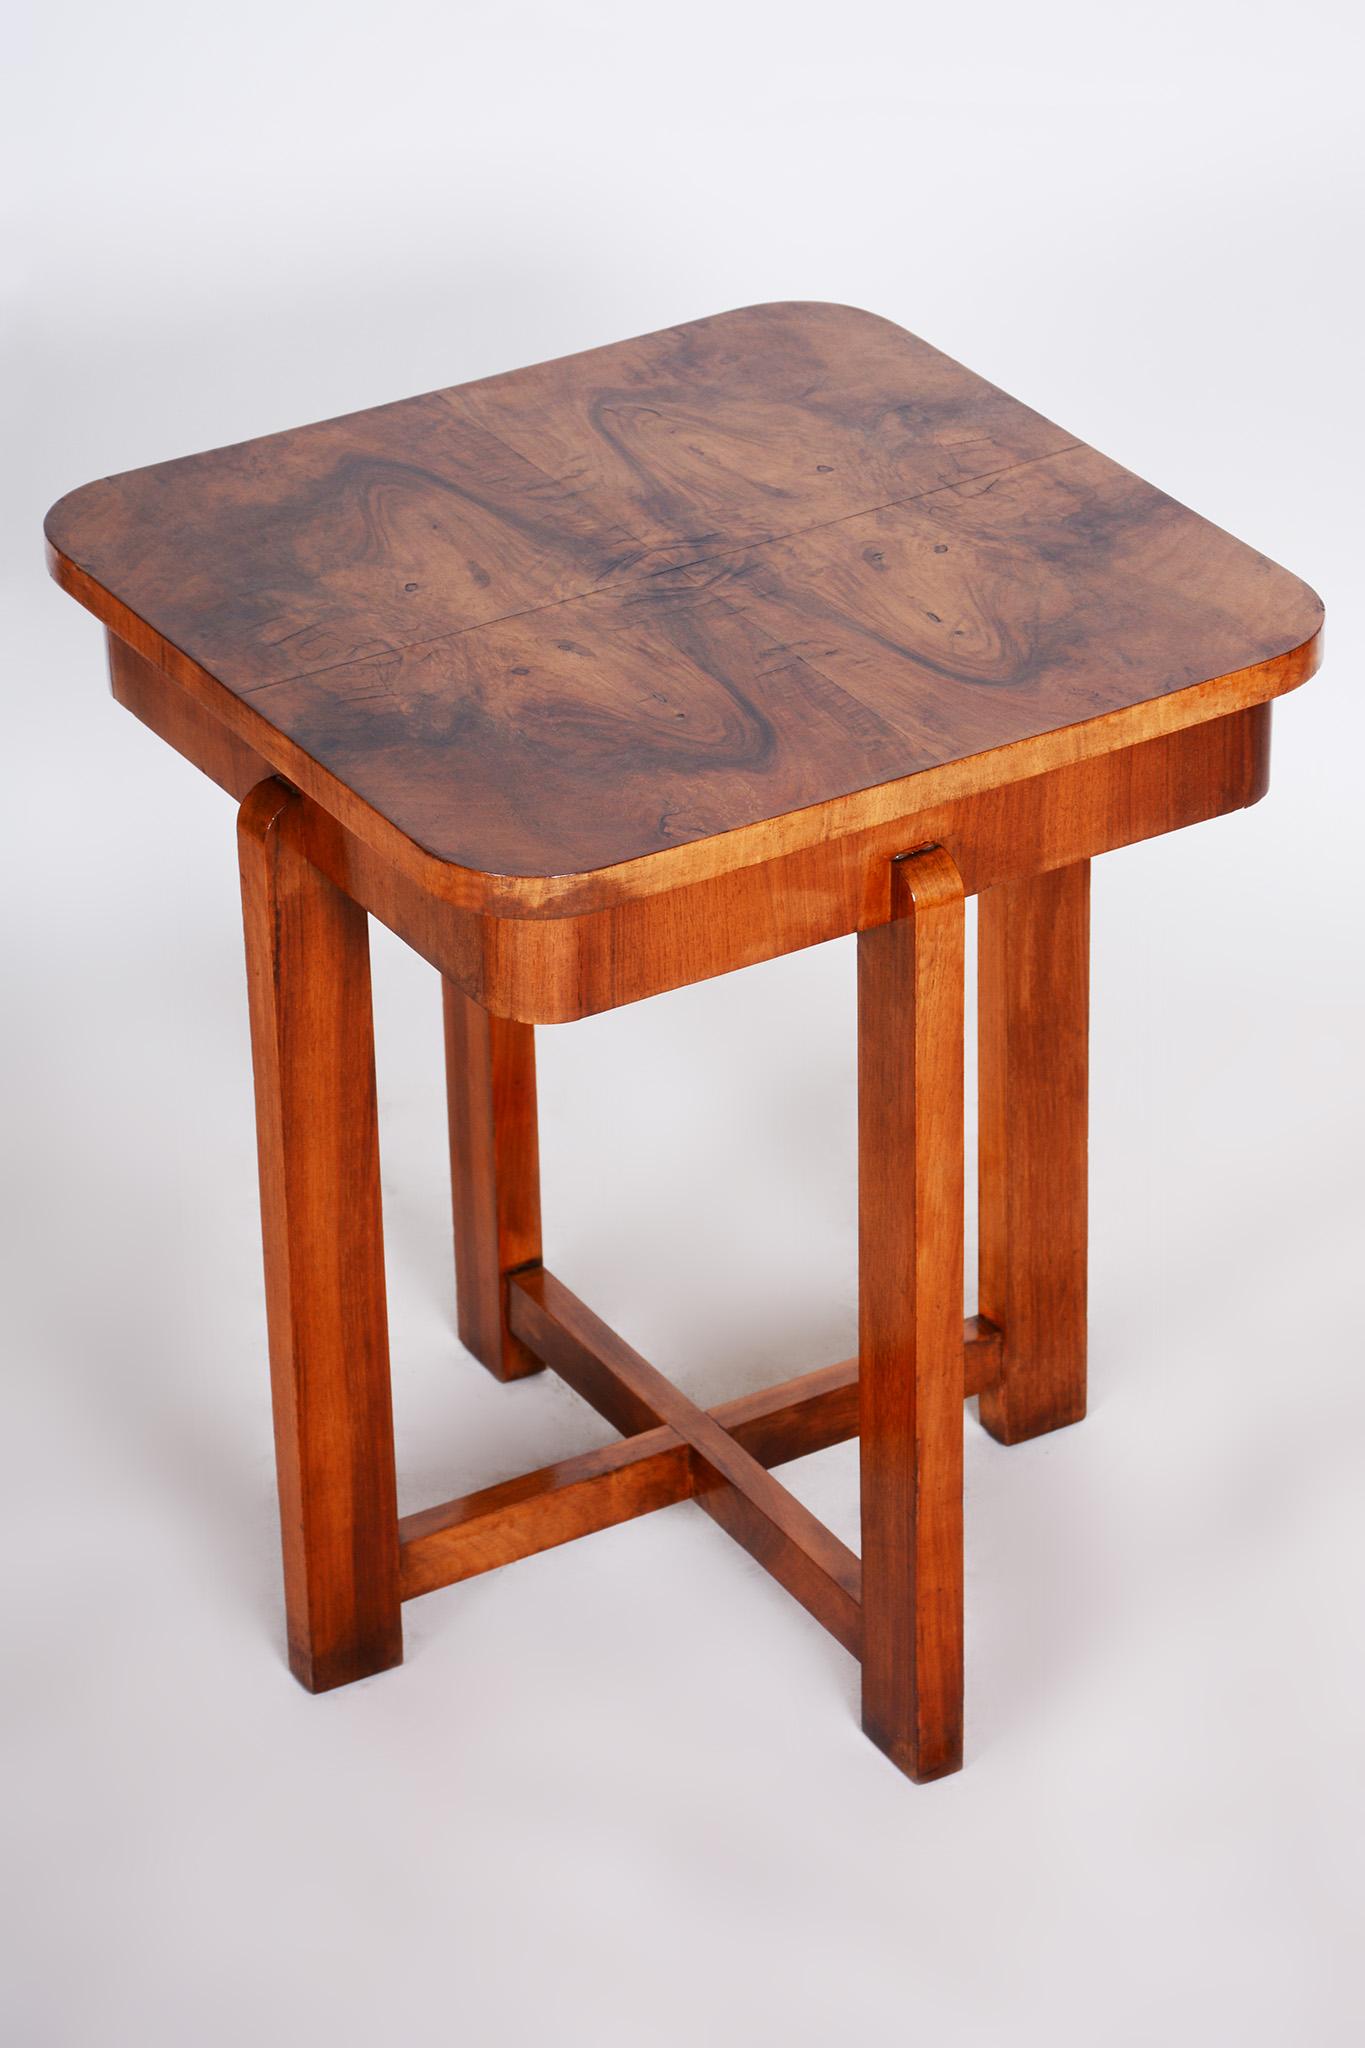 Wood Small Czech Art Deco Table, Made in the 1930s Out of Walnut, Fully Restored